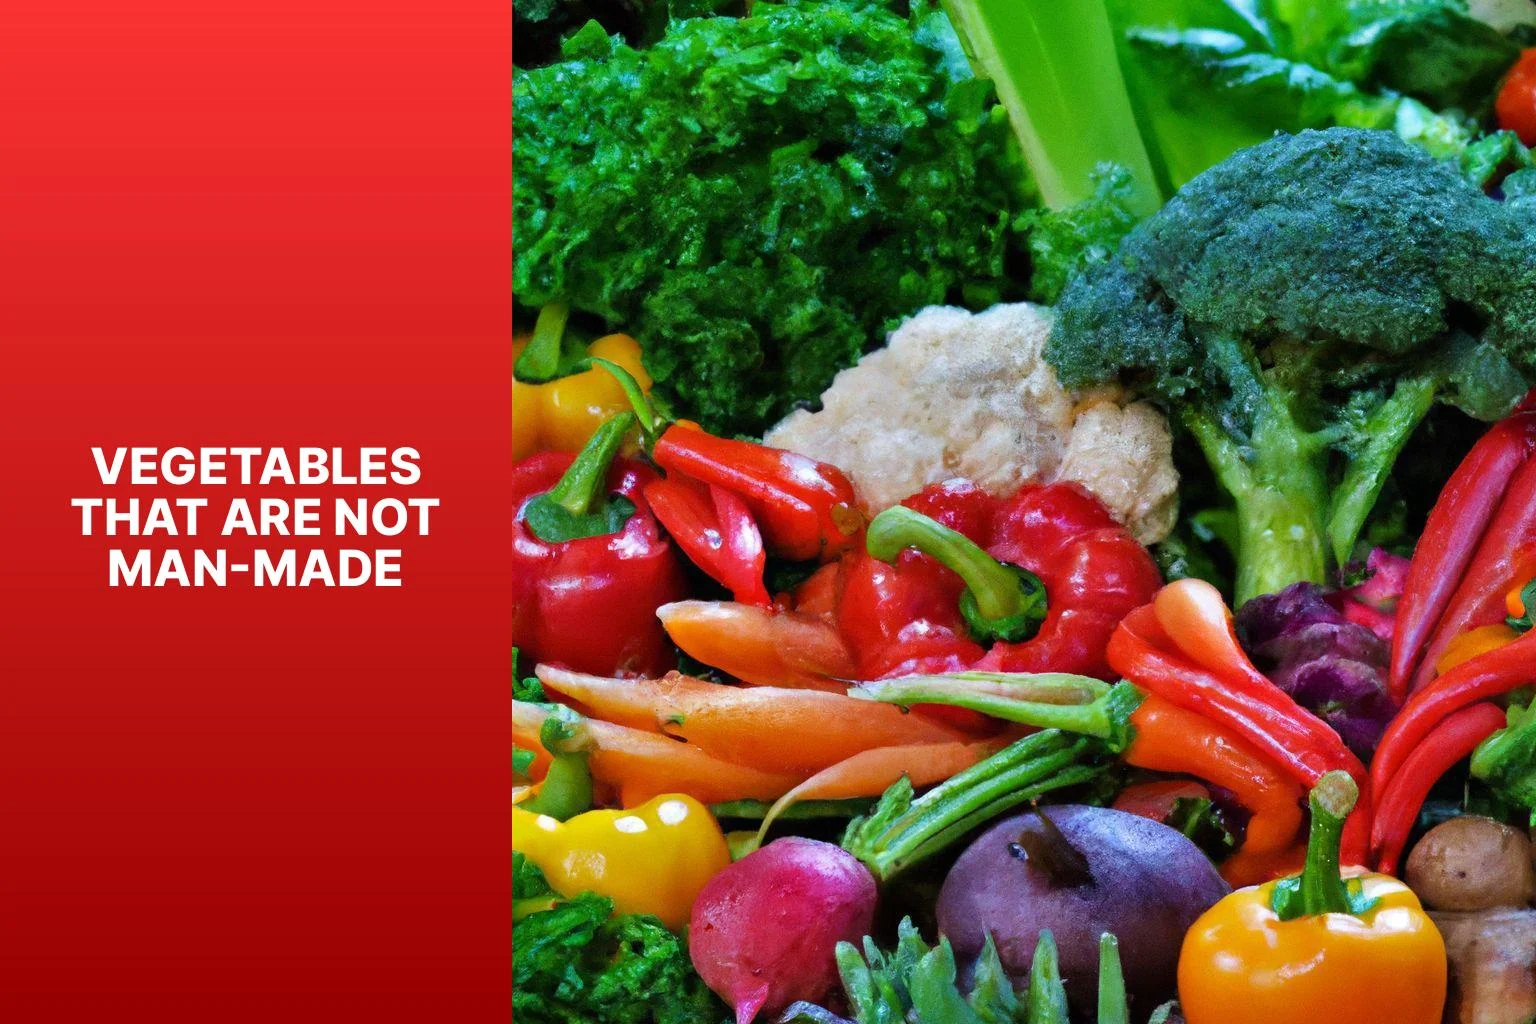 Vegetables That Are Not Man-Made - What Fruits And Vegetables Are Not Man Made? 